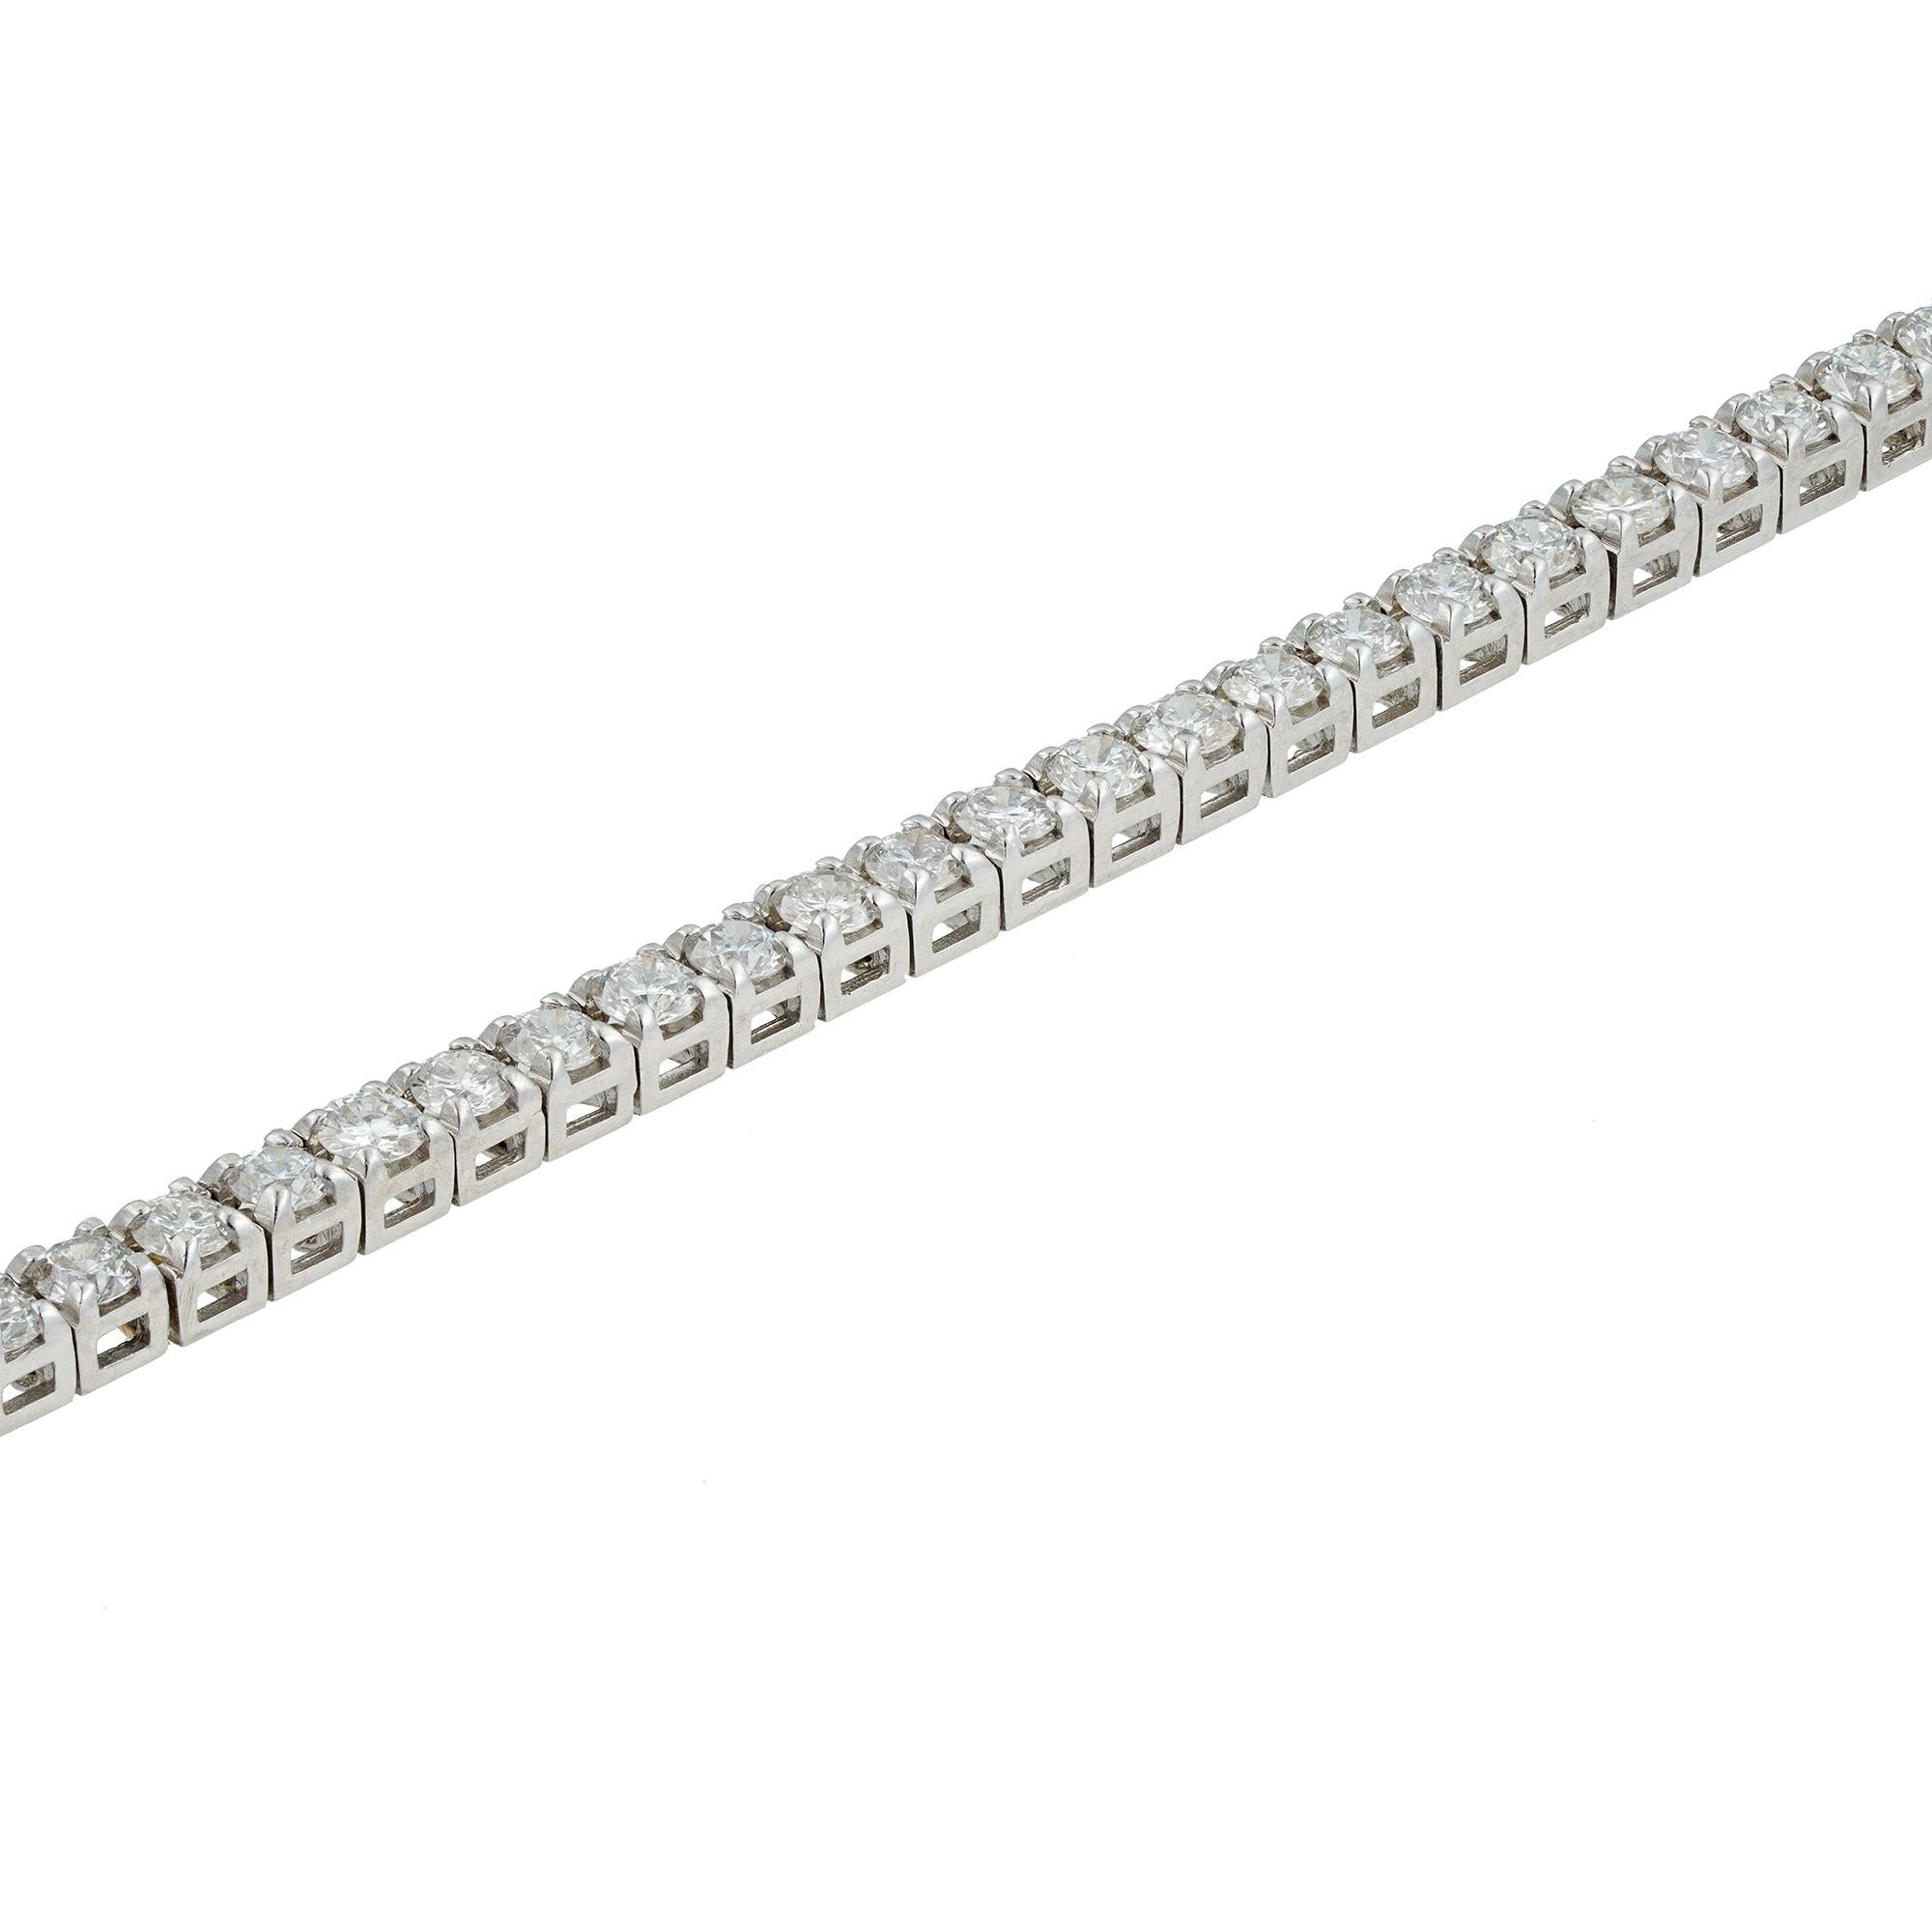 A diamond line bracelet set with 72 round brilliant-cut diamonds, weighing a total of 2.97 carats, all four claw-set to a white gold articulated mount with a concealed push clasp, hallmarked 18ct gold London 2016, bearing the Bentley & Skinner